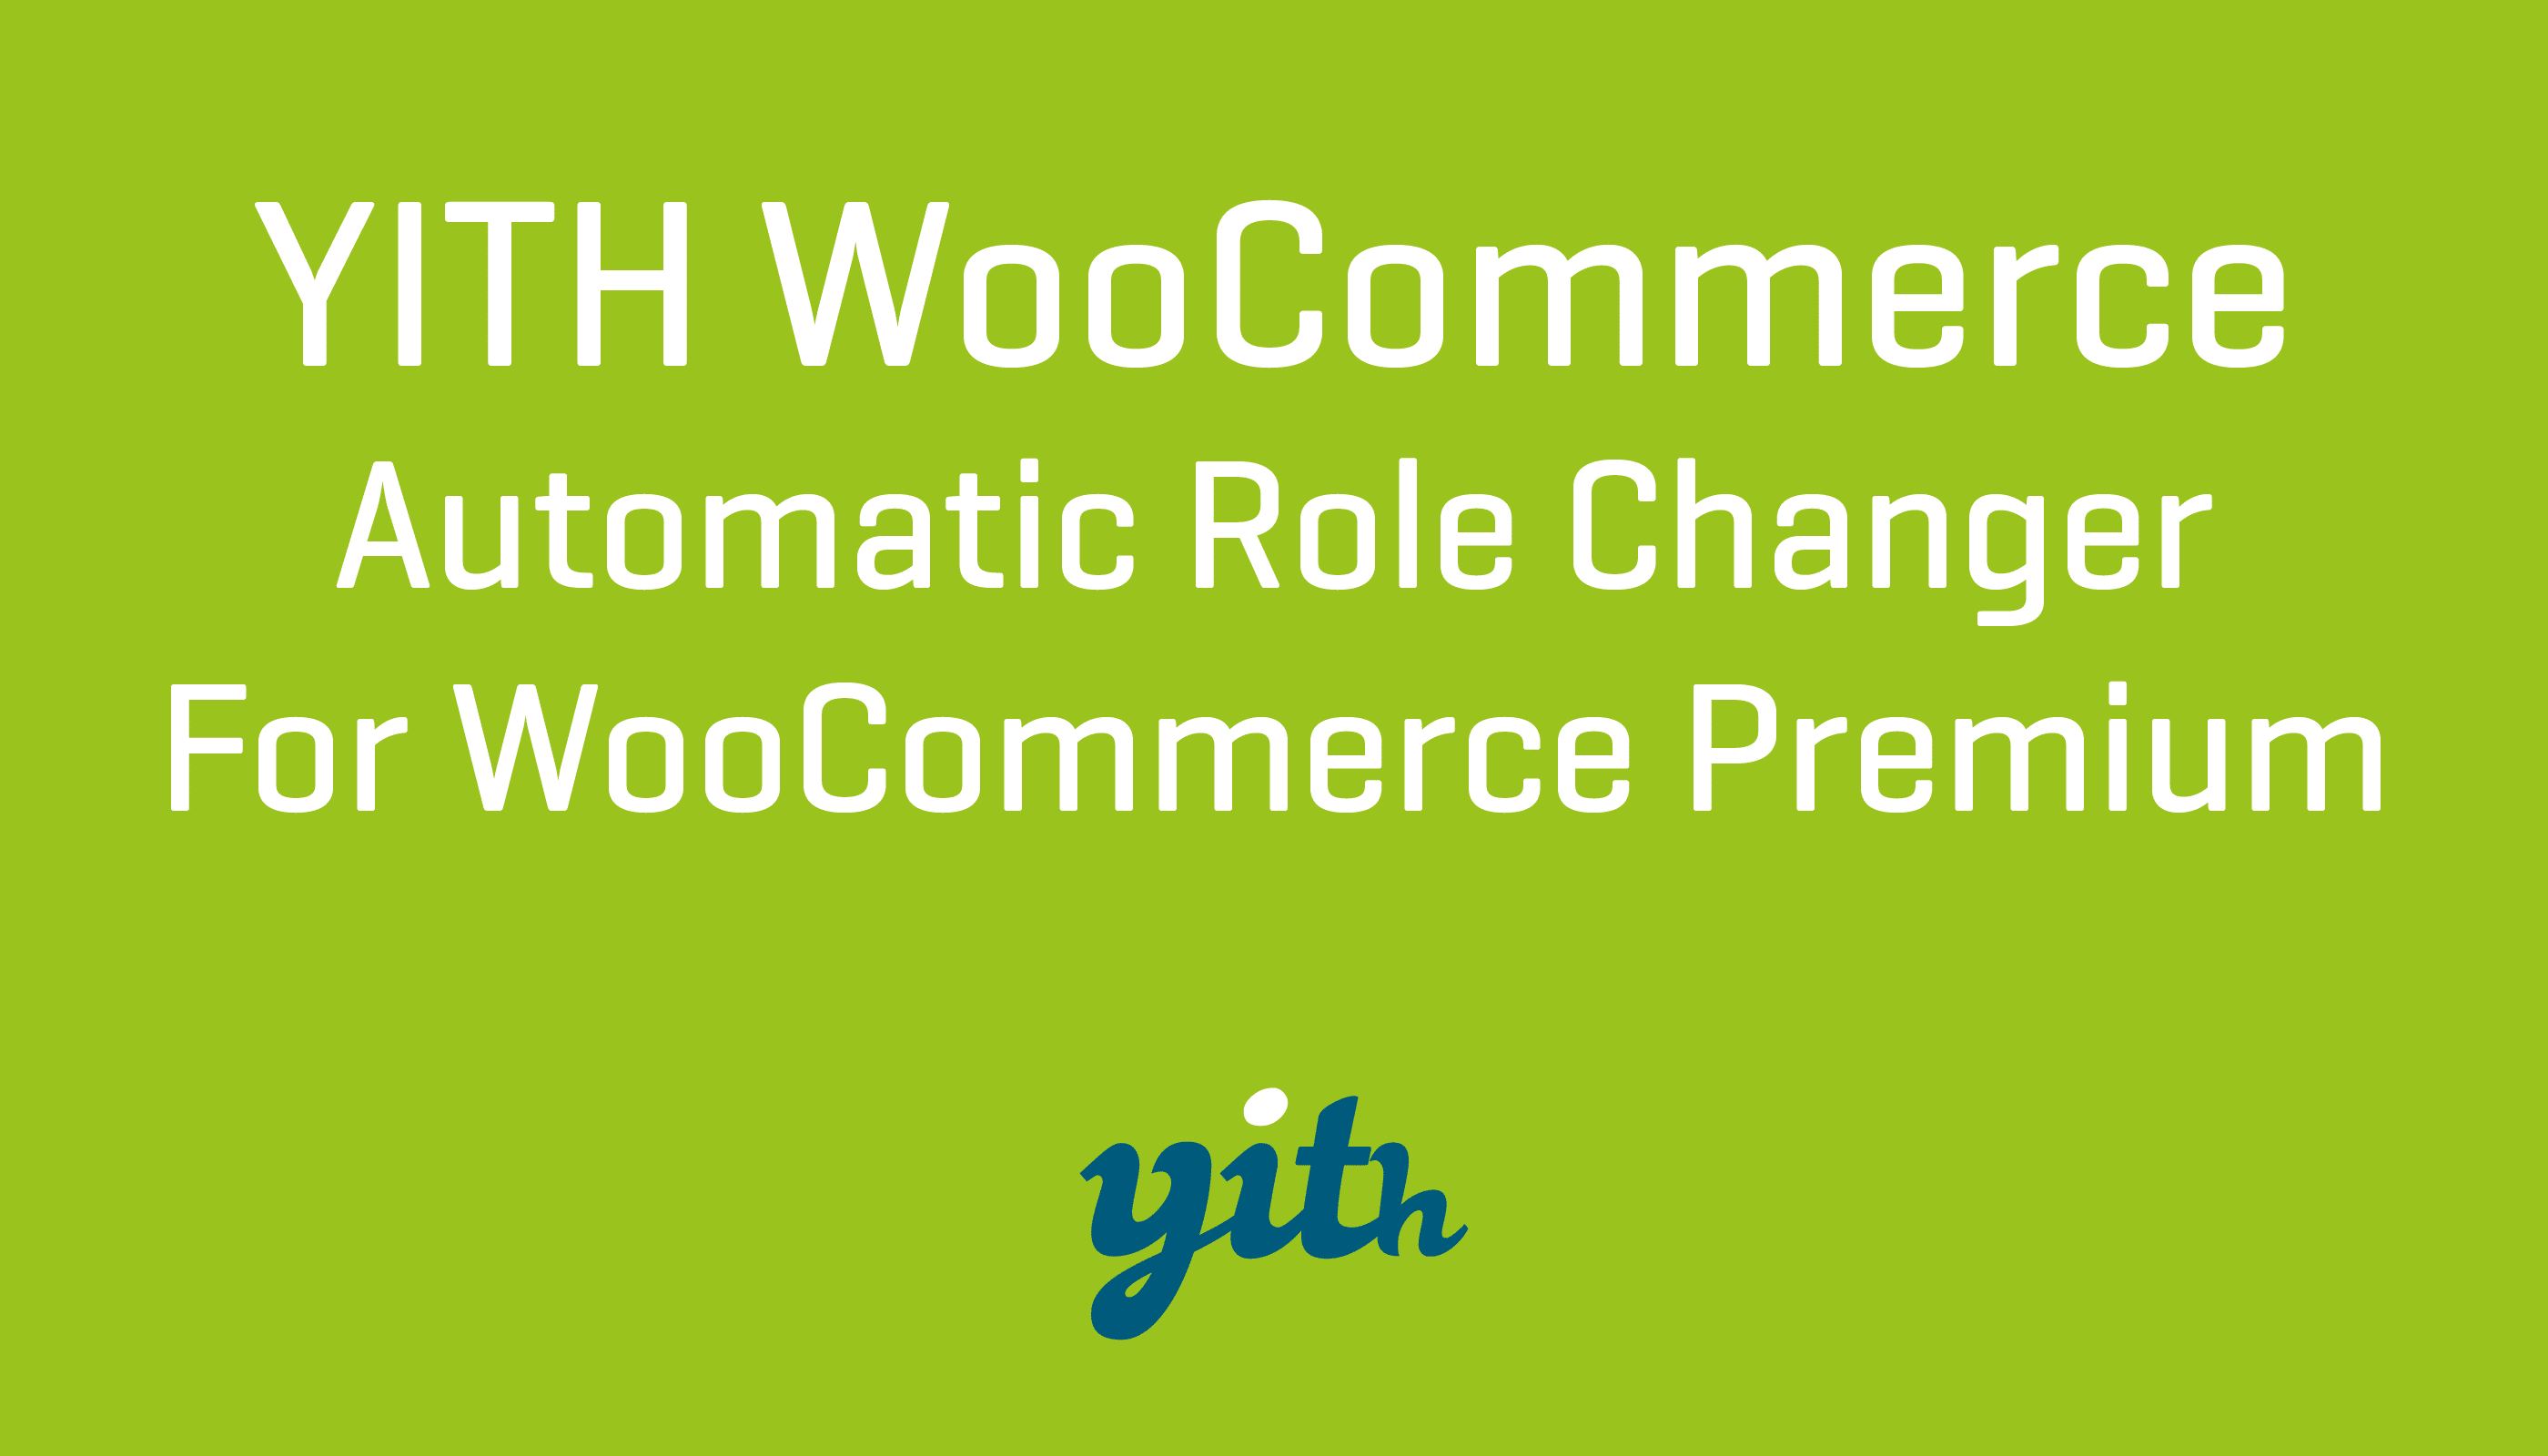 YITH WooCommerce Automatic Role Changer